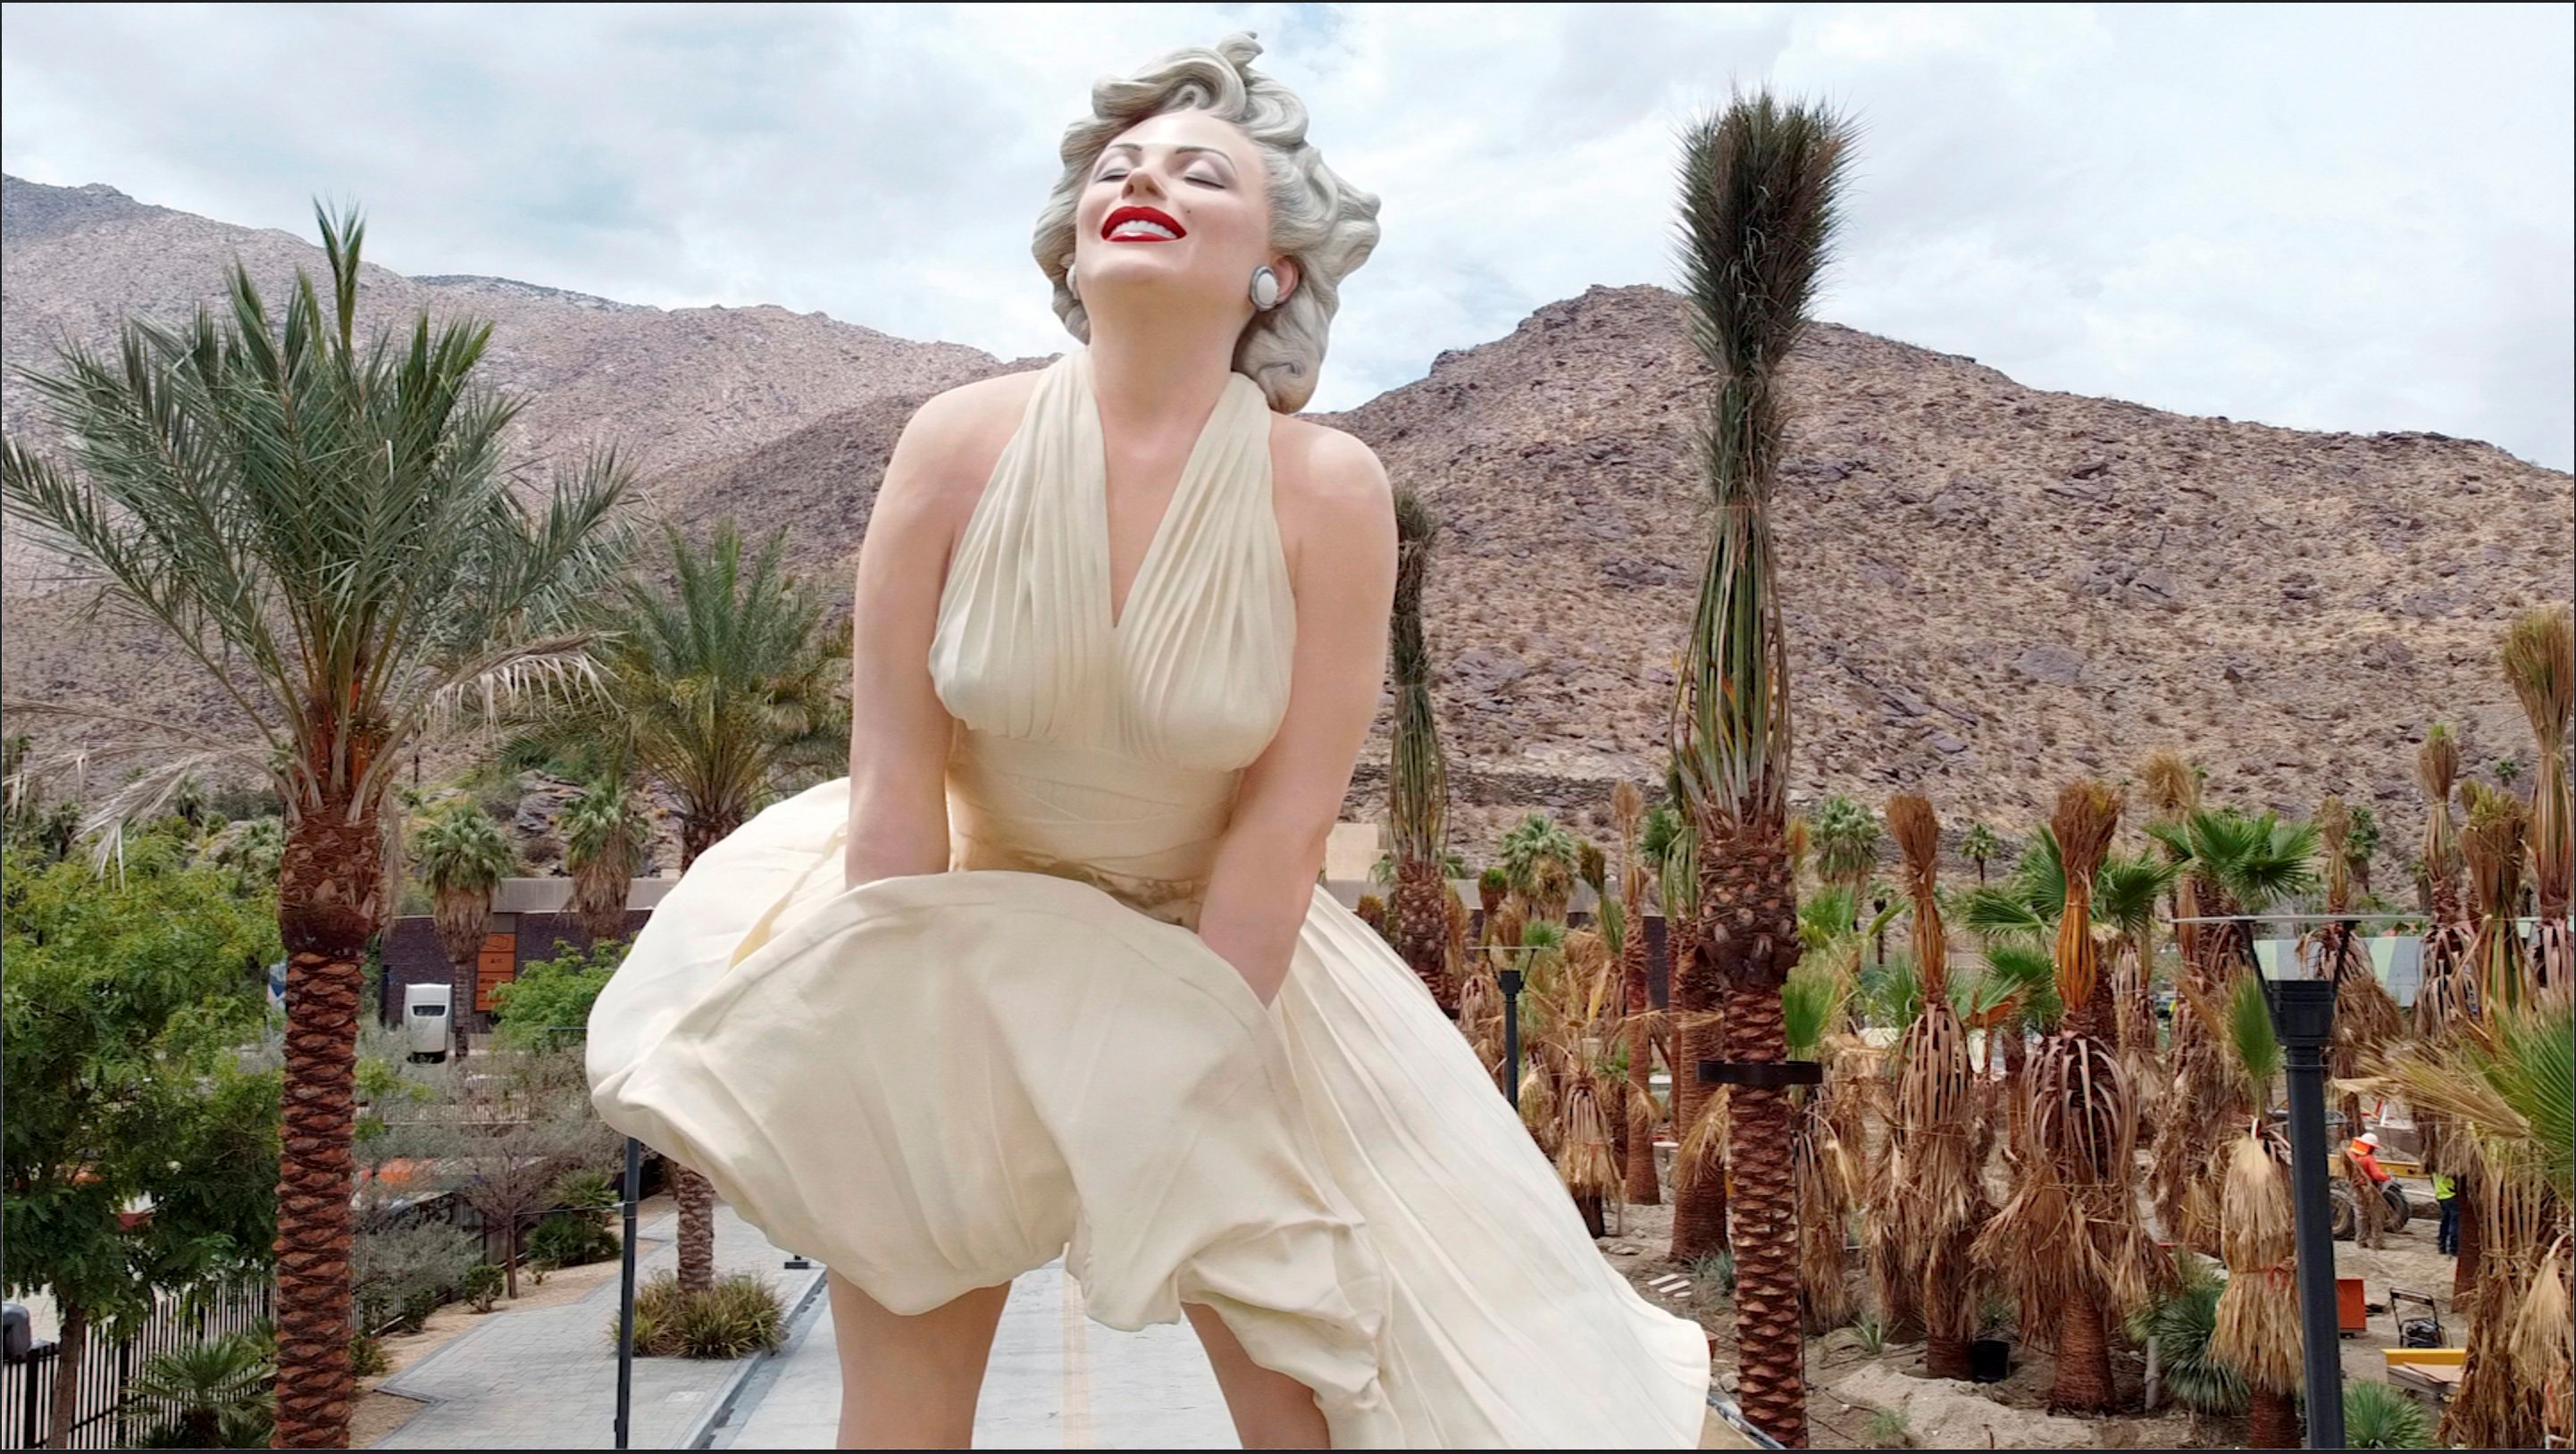 A Giant Statue of Marilyn Monroe Will Be Installed in Front of the Palm  Springs Art Museum. Its Director Says It Objectifies Women